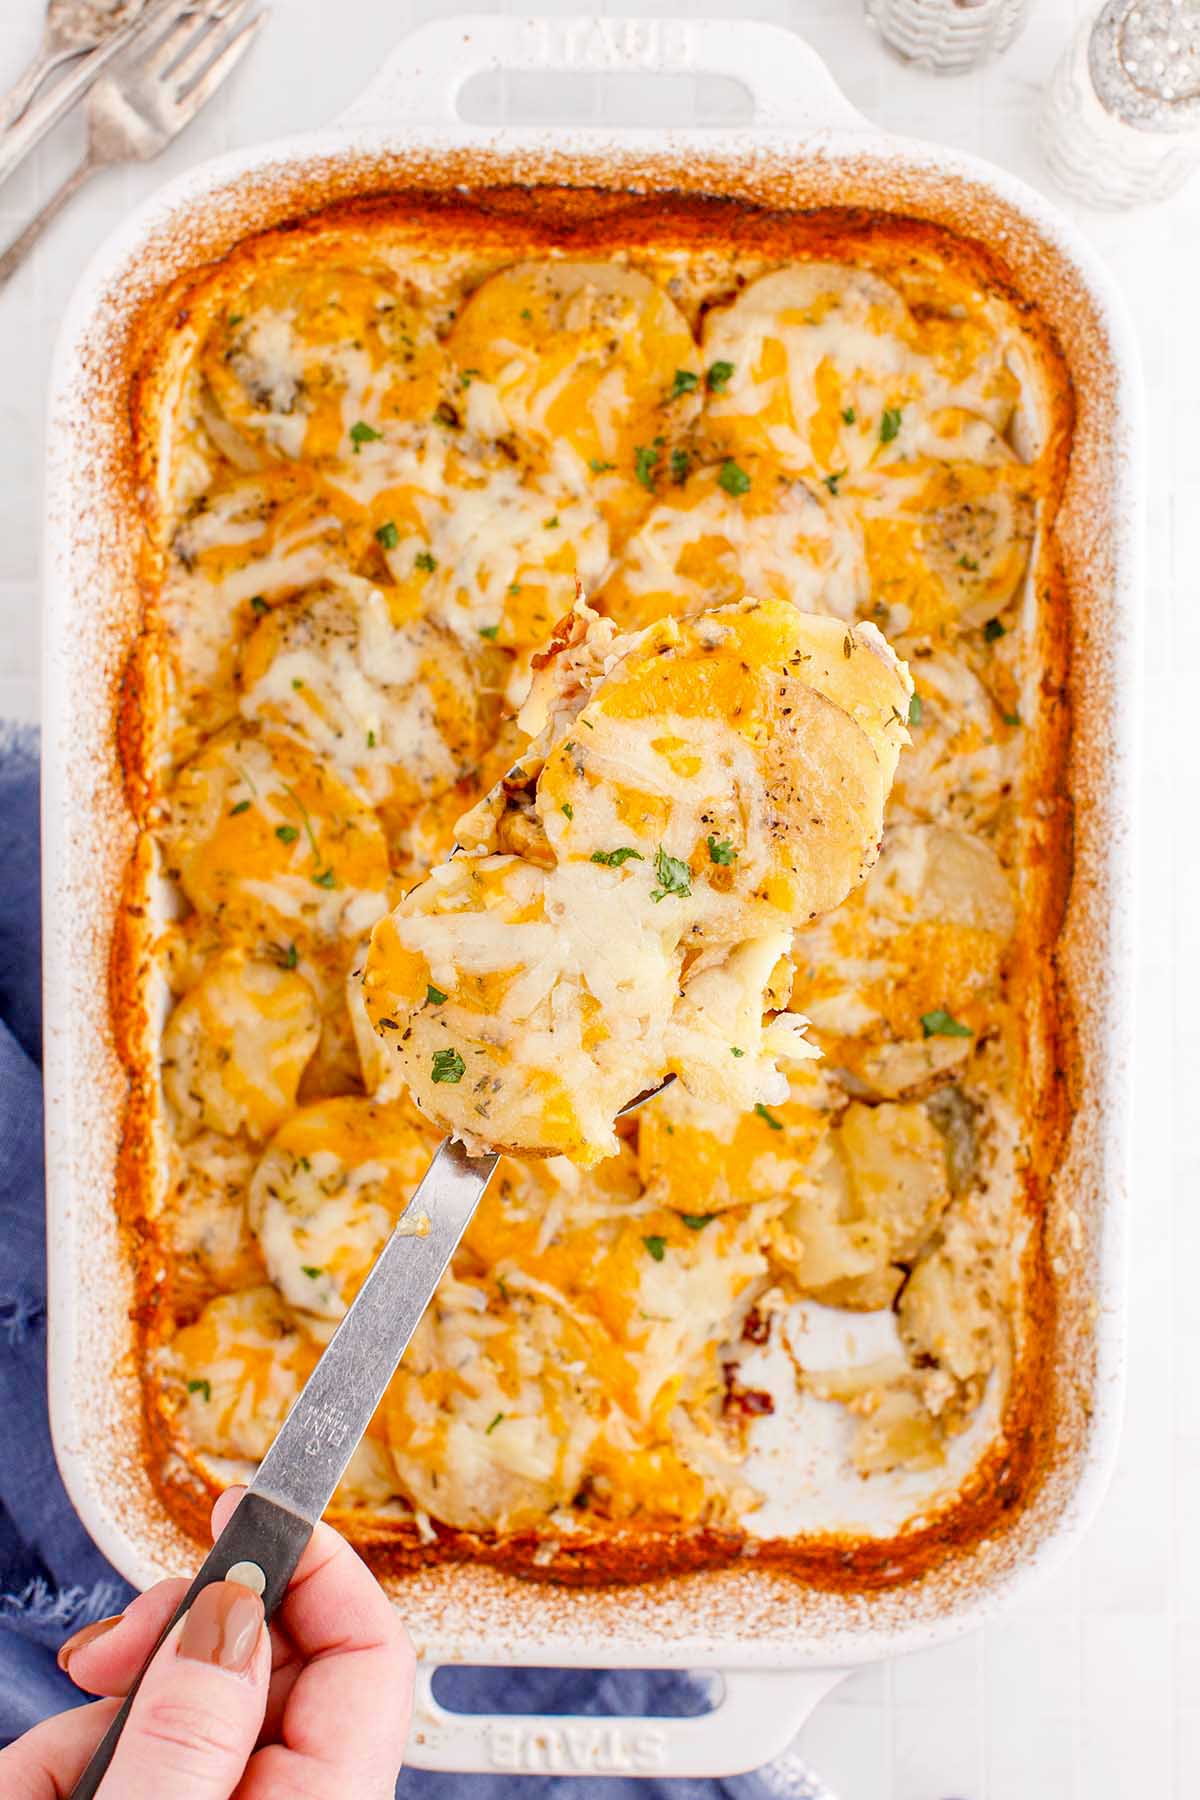 Potatoes Au Gratin in a baking dish with a spoon scooping out a portion.